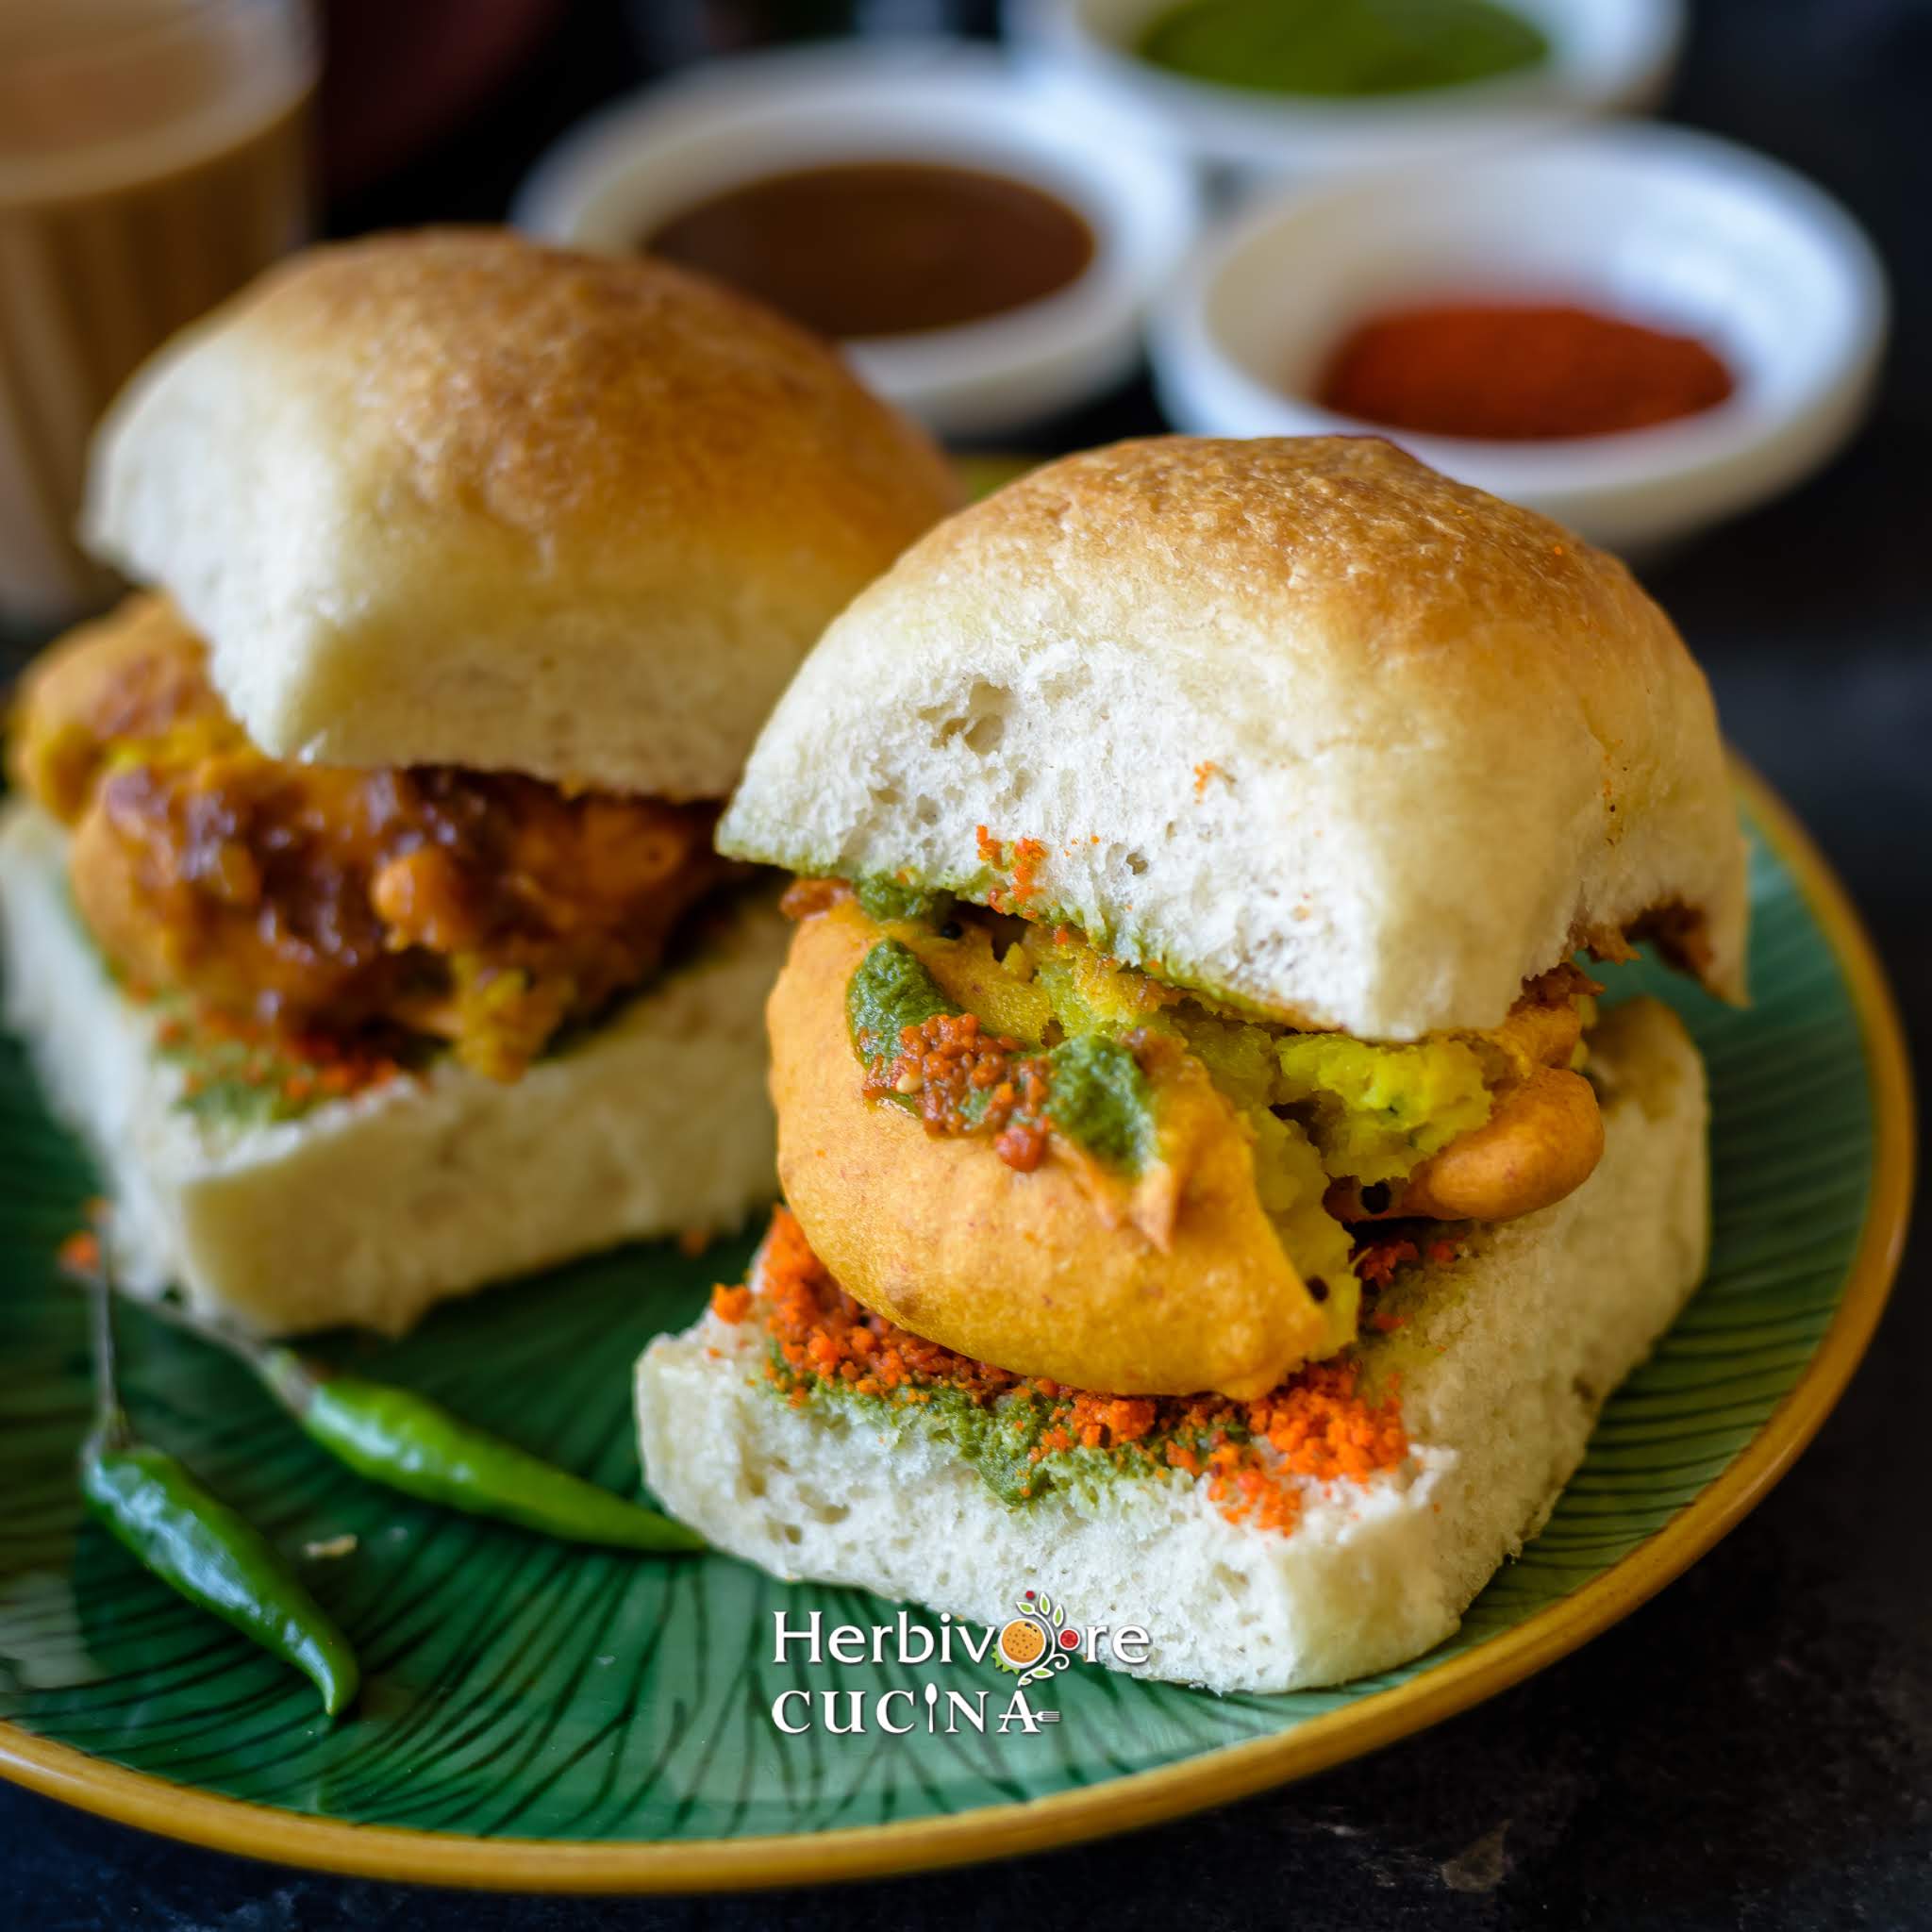 Vada Pav served in a green plate with more vada pav in the background and chutneys served in bowls placed behind it.